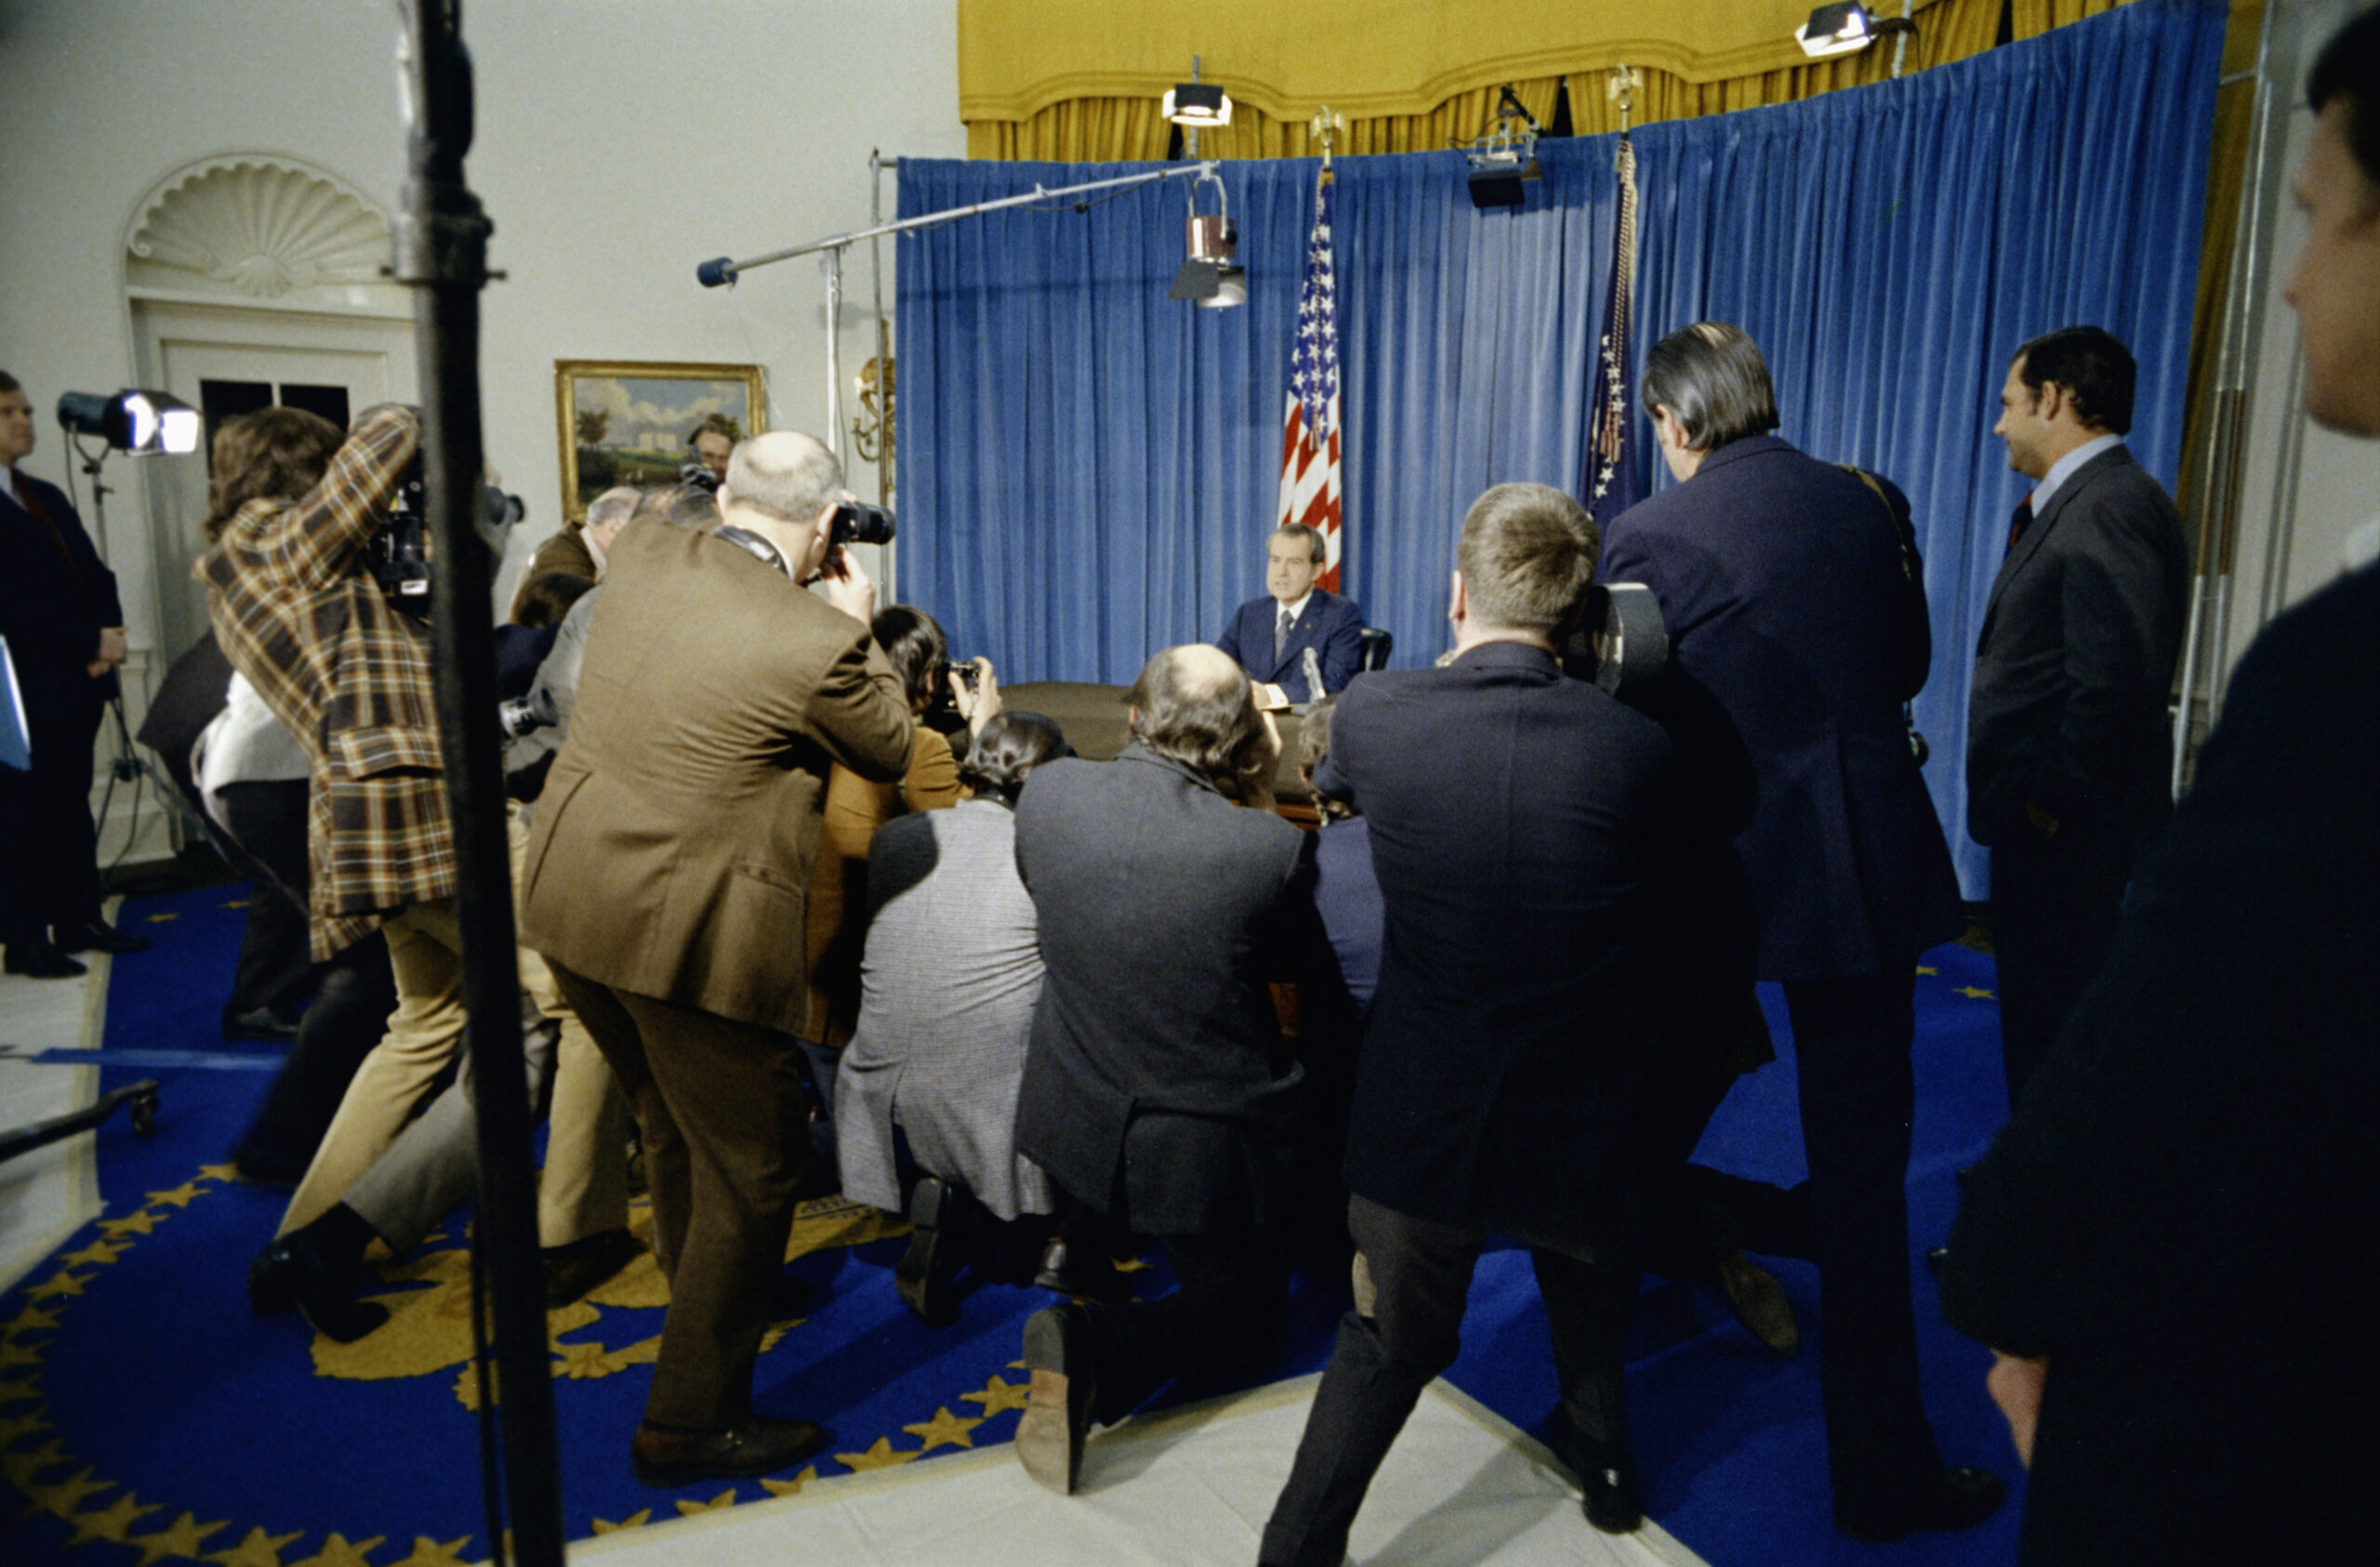 Nixon announces “preliminary agreement” to end the war in Vietnam – National Archives Identifier: 66394334